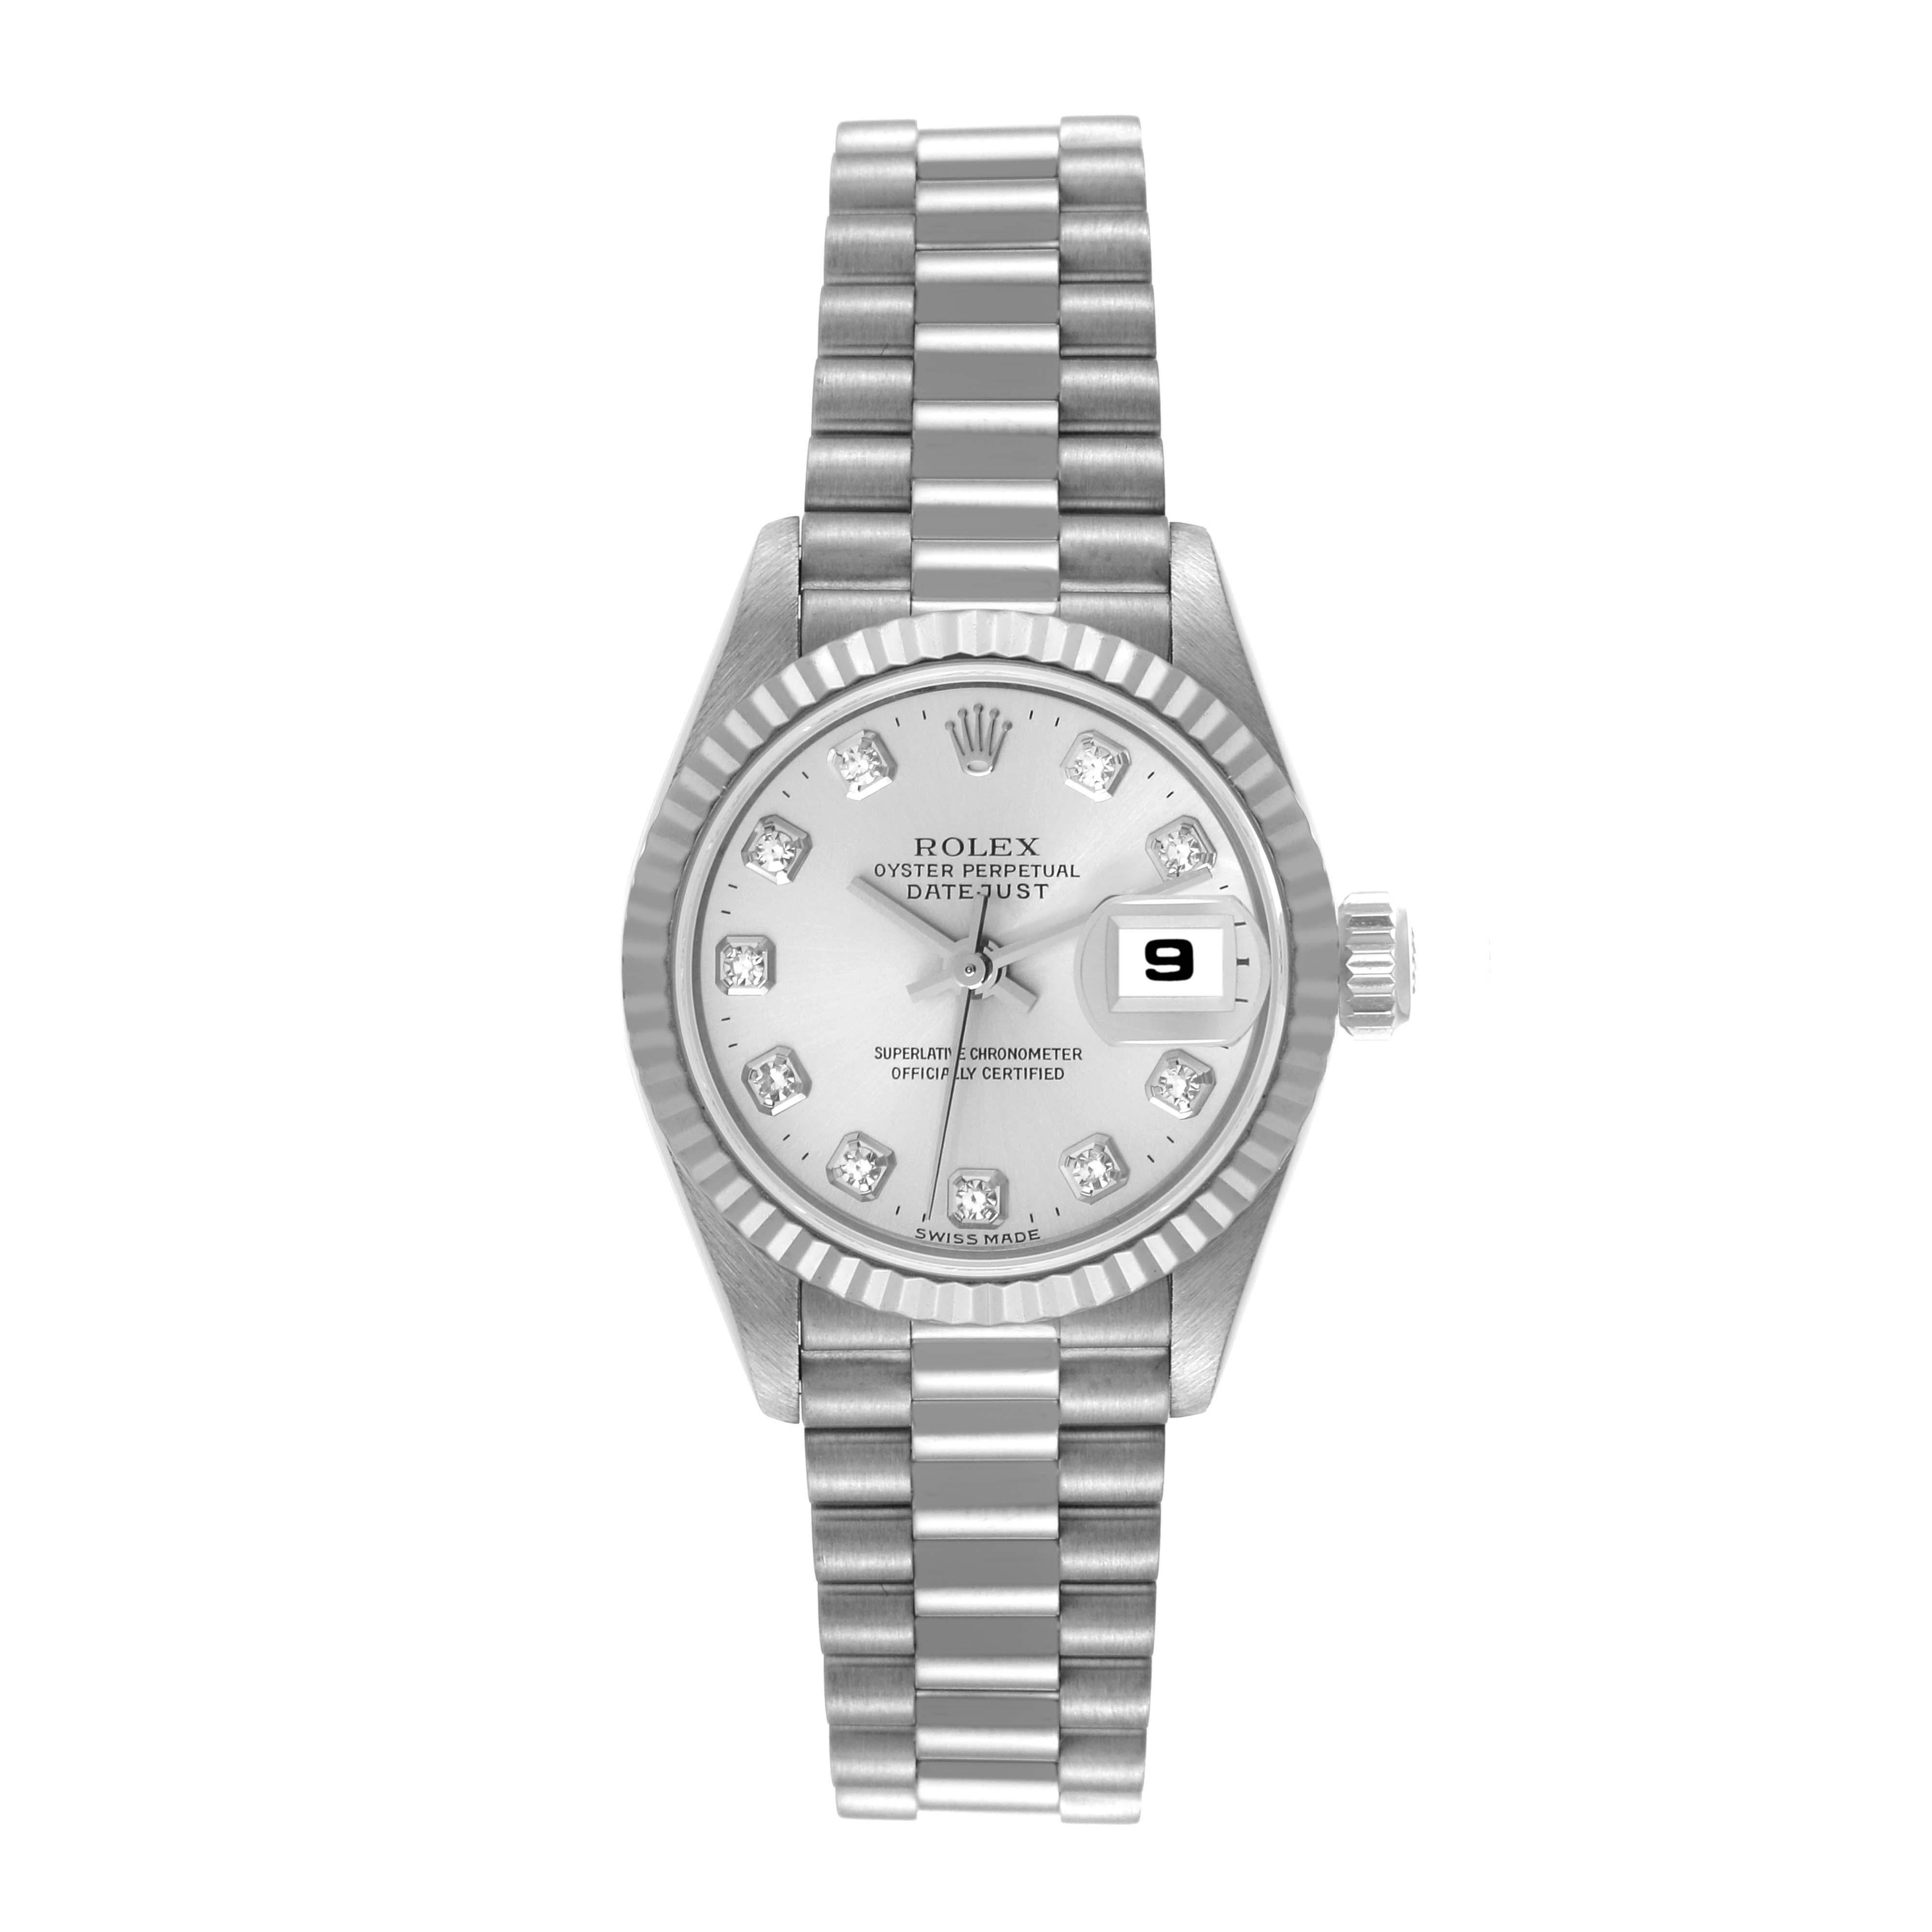 Rolex President Datejust 26 White Gold Diamond Dial Ladies Watch 69179. Officially certified chronometer self-winding movement. 18k white gold oyster case 26.0 mm in diameter. Rolex logo on a crown. 18K white gold fluted bezel. Scratch resistant